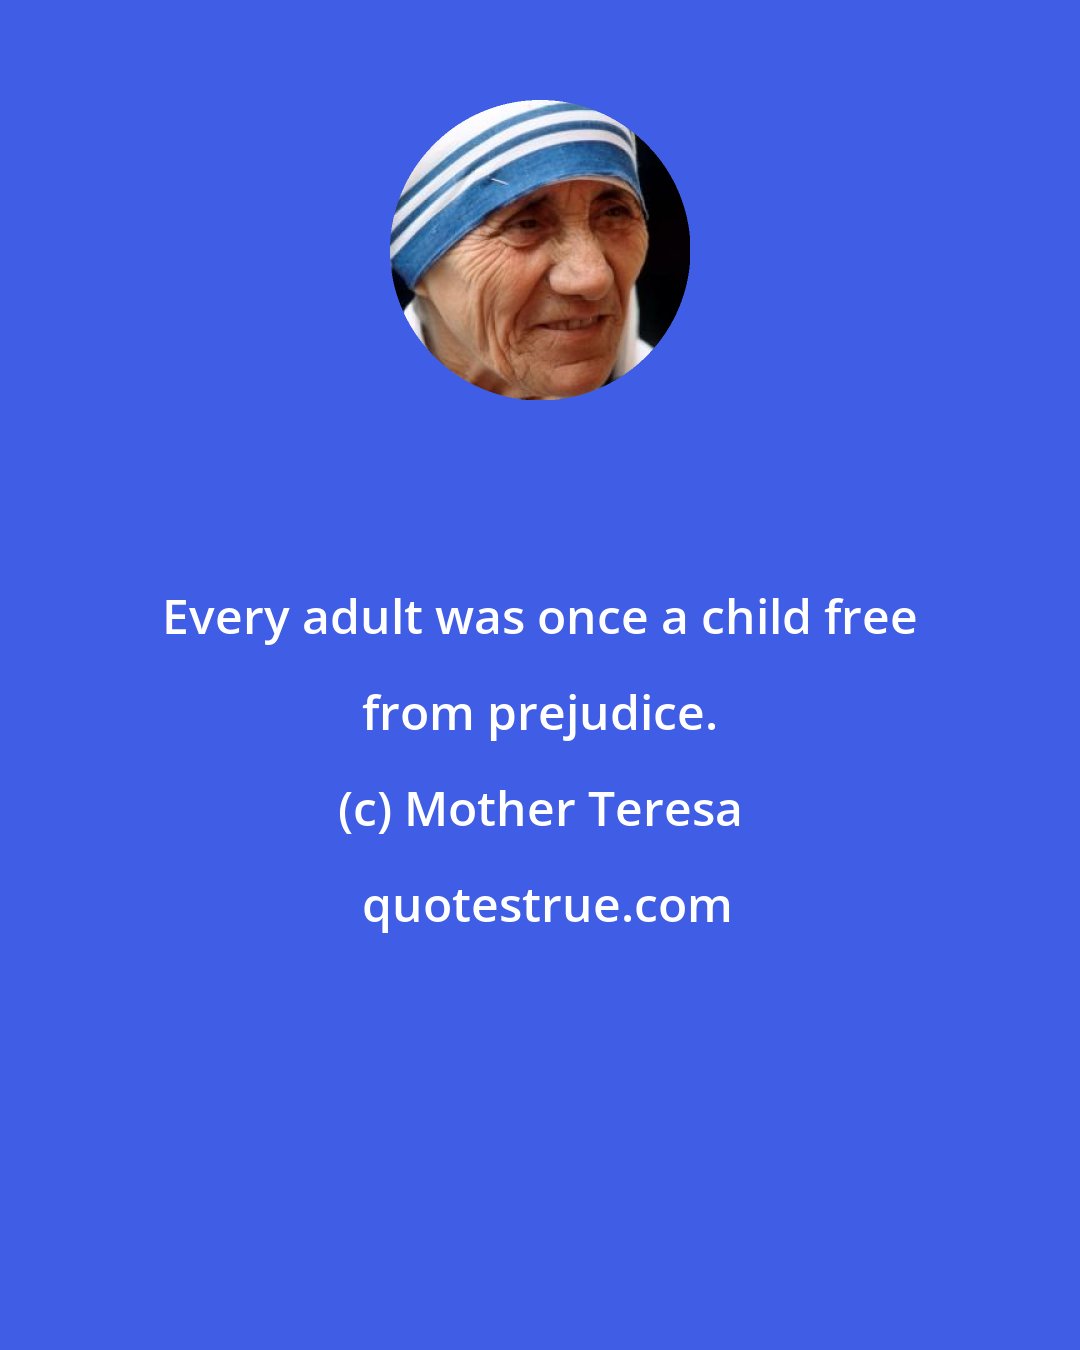 Mother Teresa: Every adult was once a child free from prejudice.